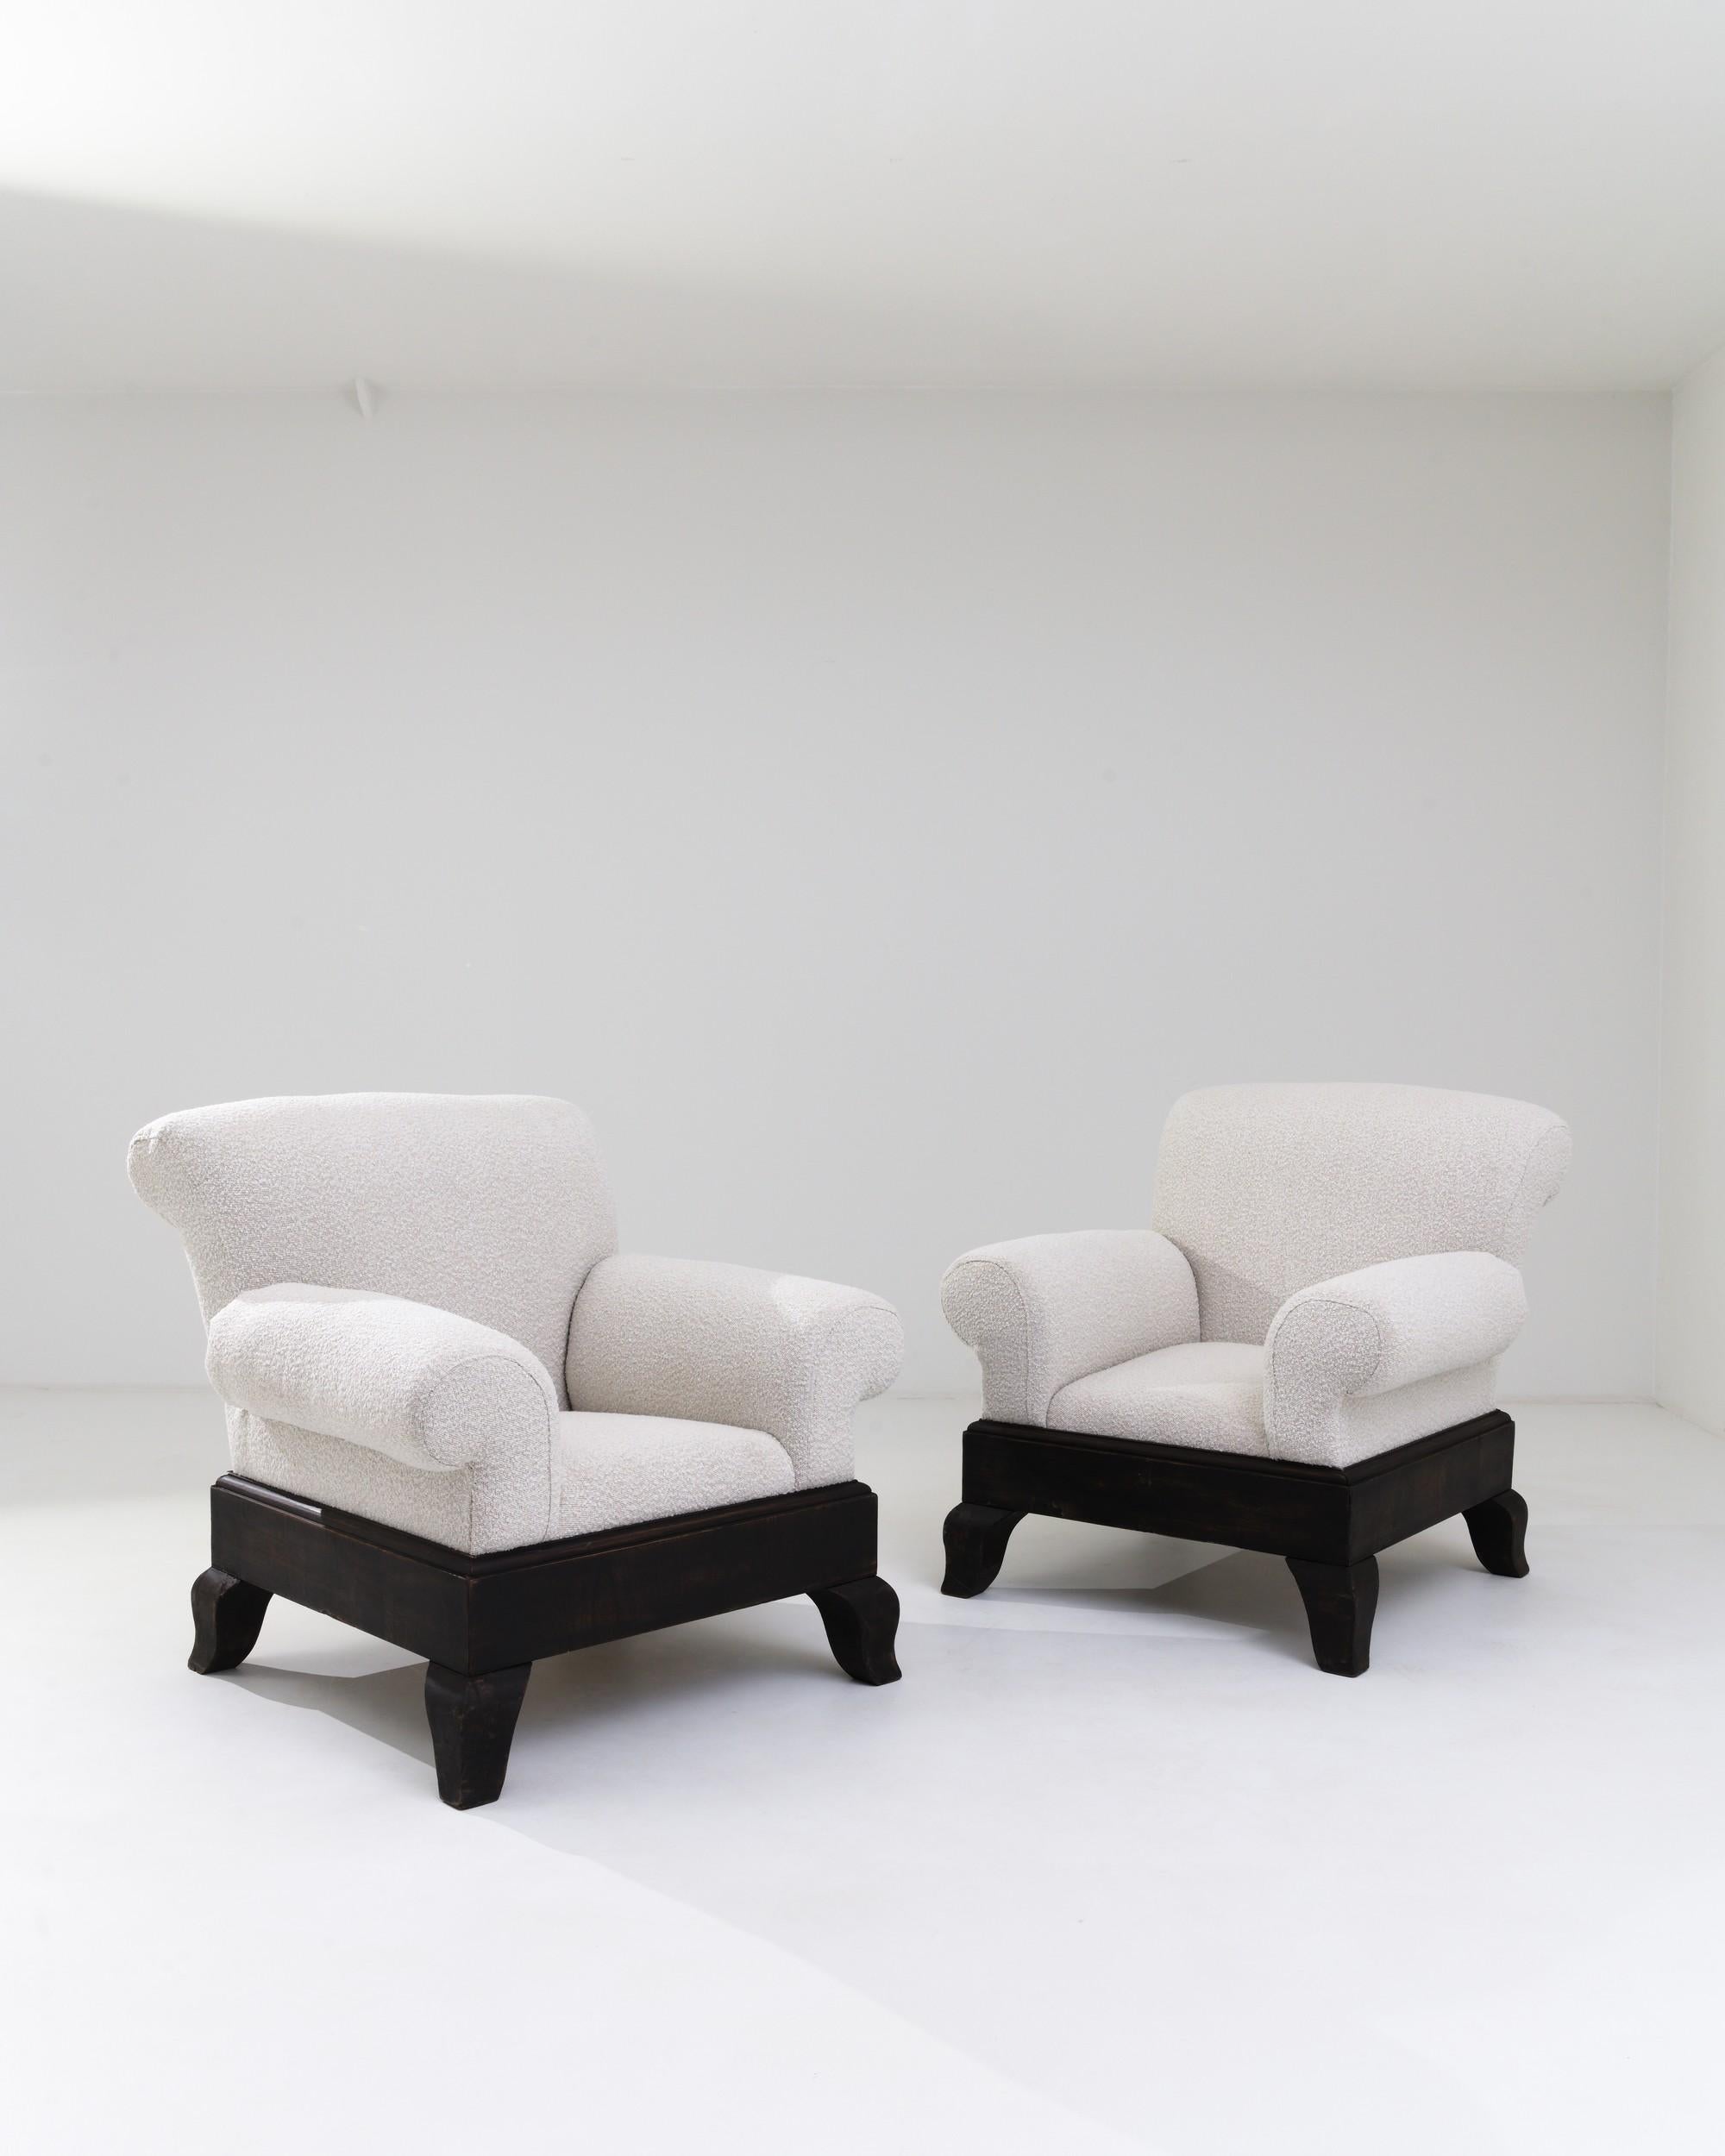 A pair of wooden upholstered armchairs created in 20th century United Kingdom. With a wide base and gracefully splayed arms, these chairs offer a sturdy and comfortable resting place. A fresh off-white boucle upholstery has been added to the